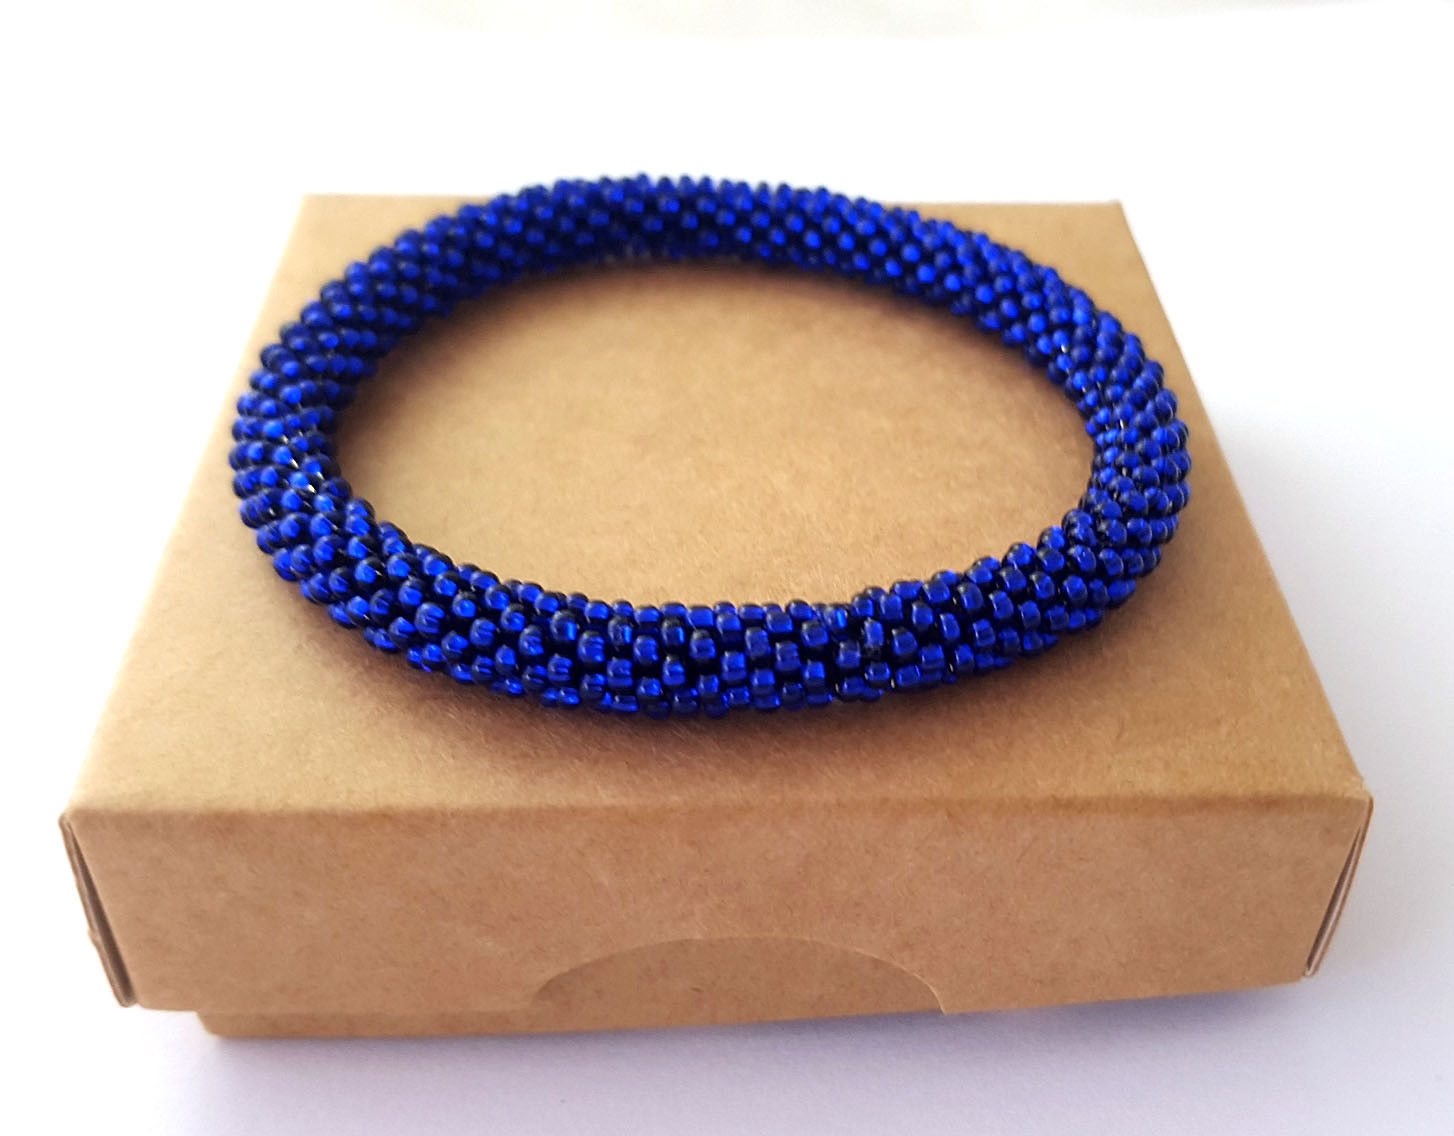 Nepal beaded rope bracelet roll it bangle royal blue wristband, gifts for dad - $8.00